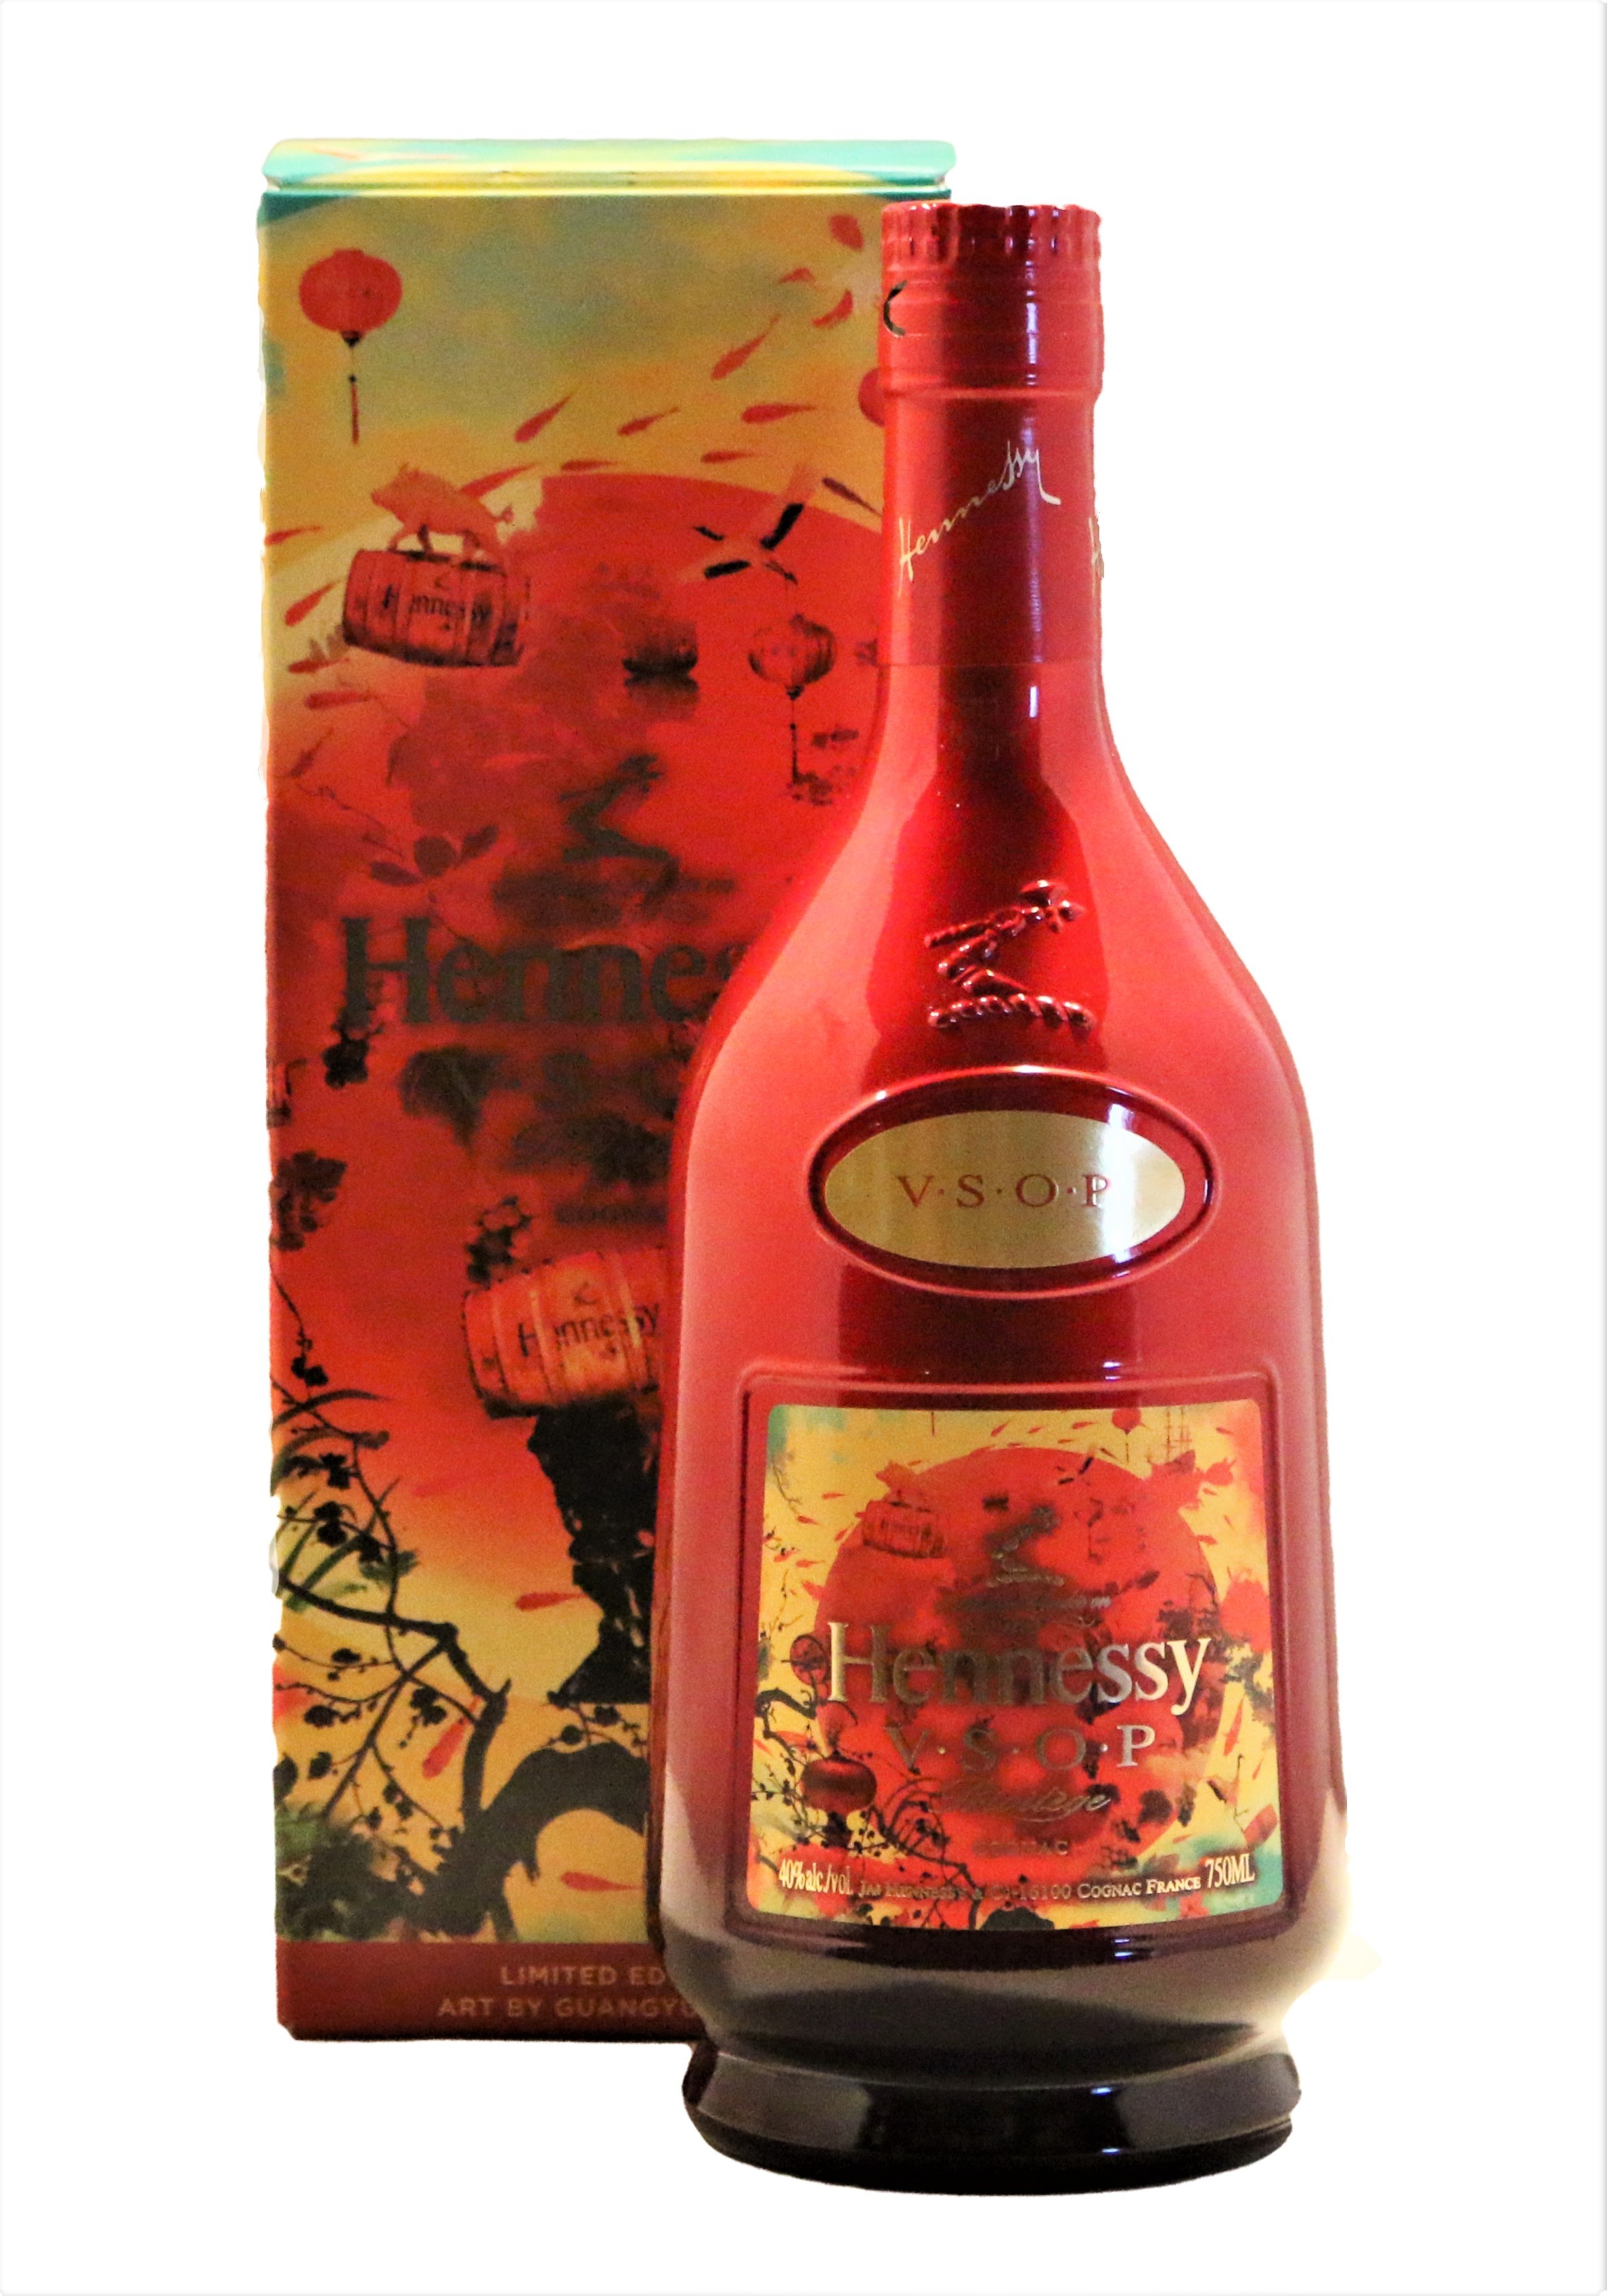 Hennessy Cognac Vsop France Limited Edition Art By Guangyu Zhang 750ml